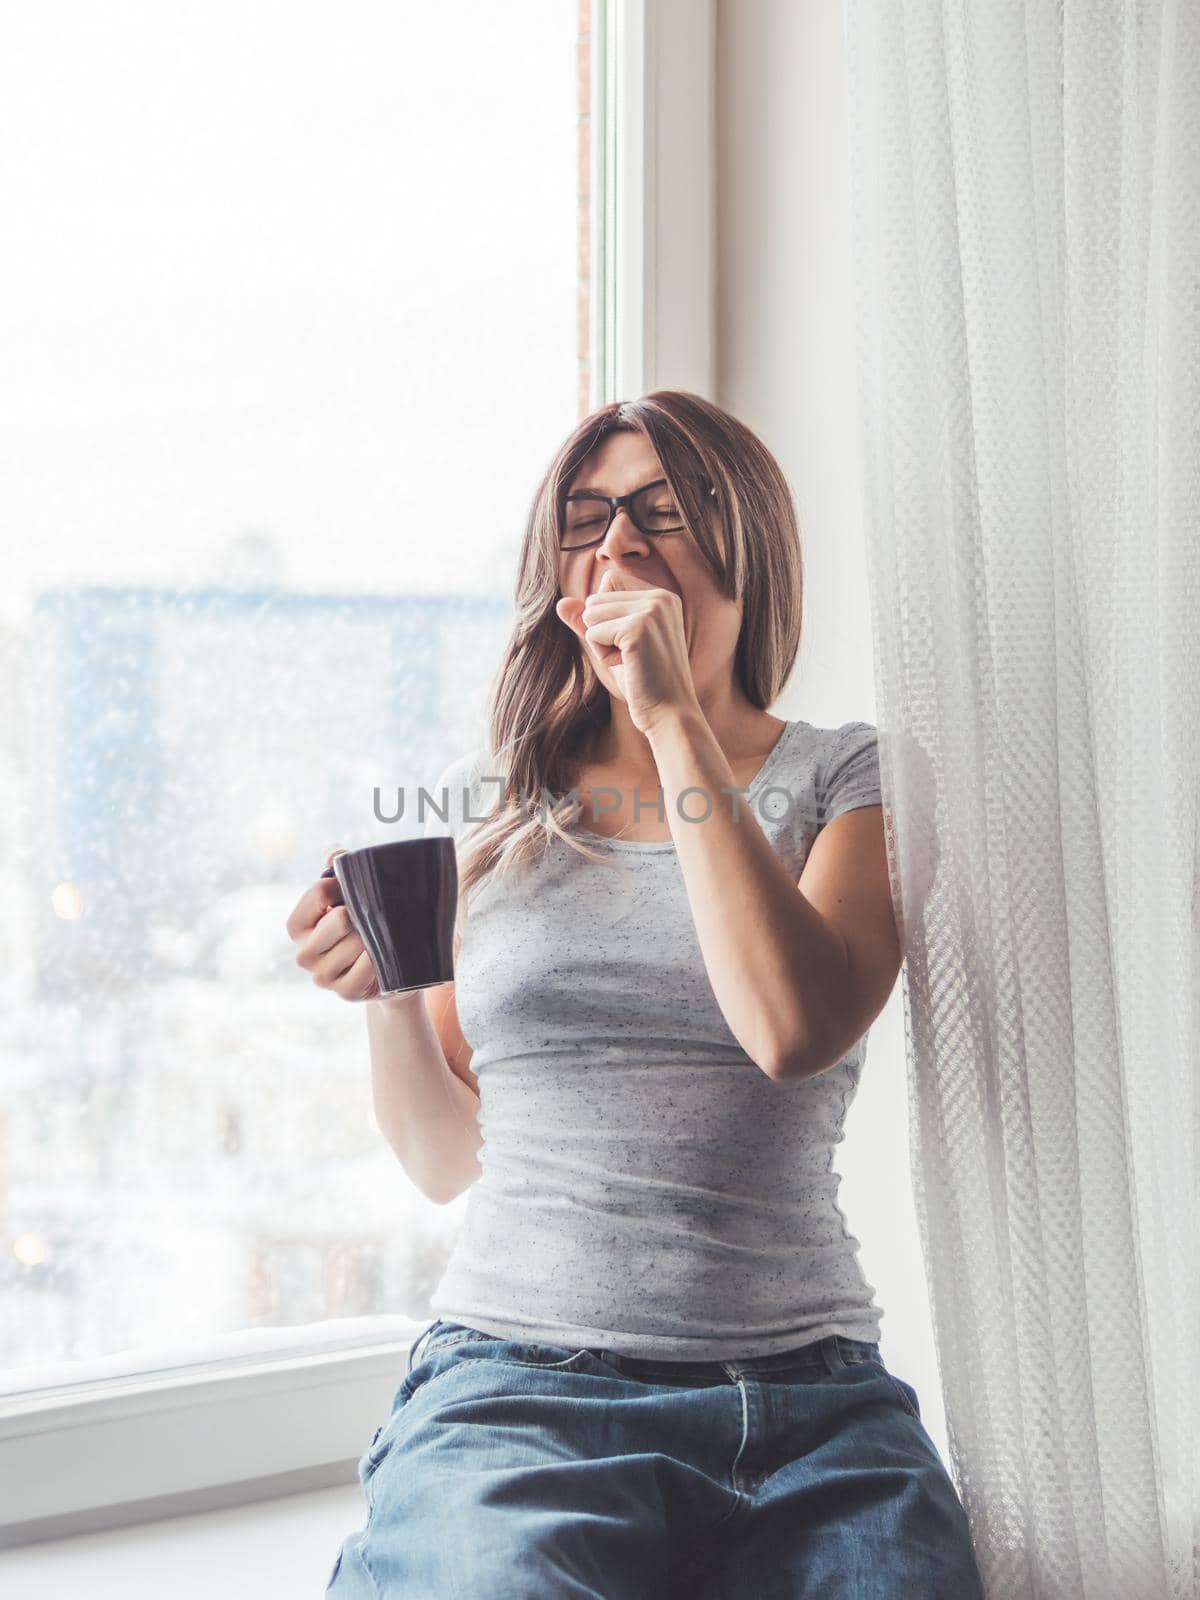 Woman with eyeglasses and curly hair sits on windowsill. Sleepy woman yawns. Morning cup of hot coffee.